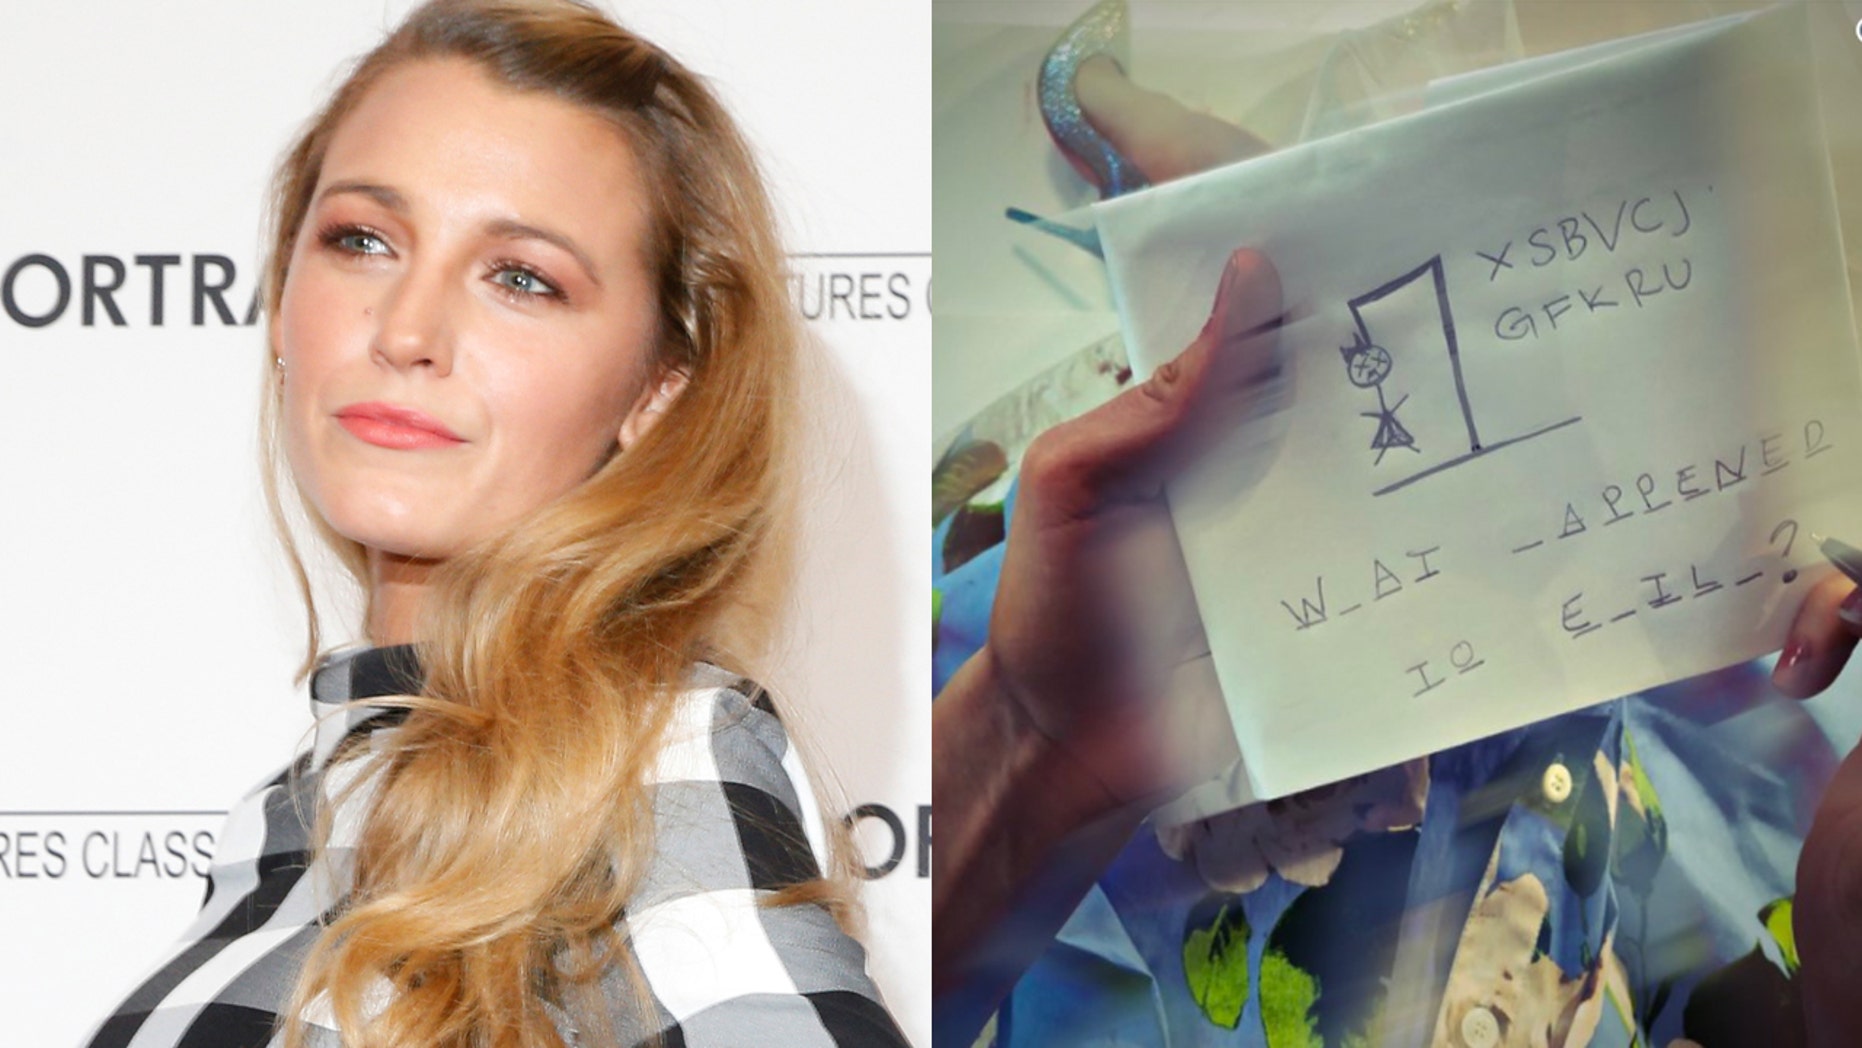 Blake Lively deletes all of her Instagram posts after sharing mysterious Twitter photo ...